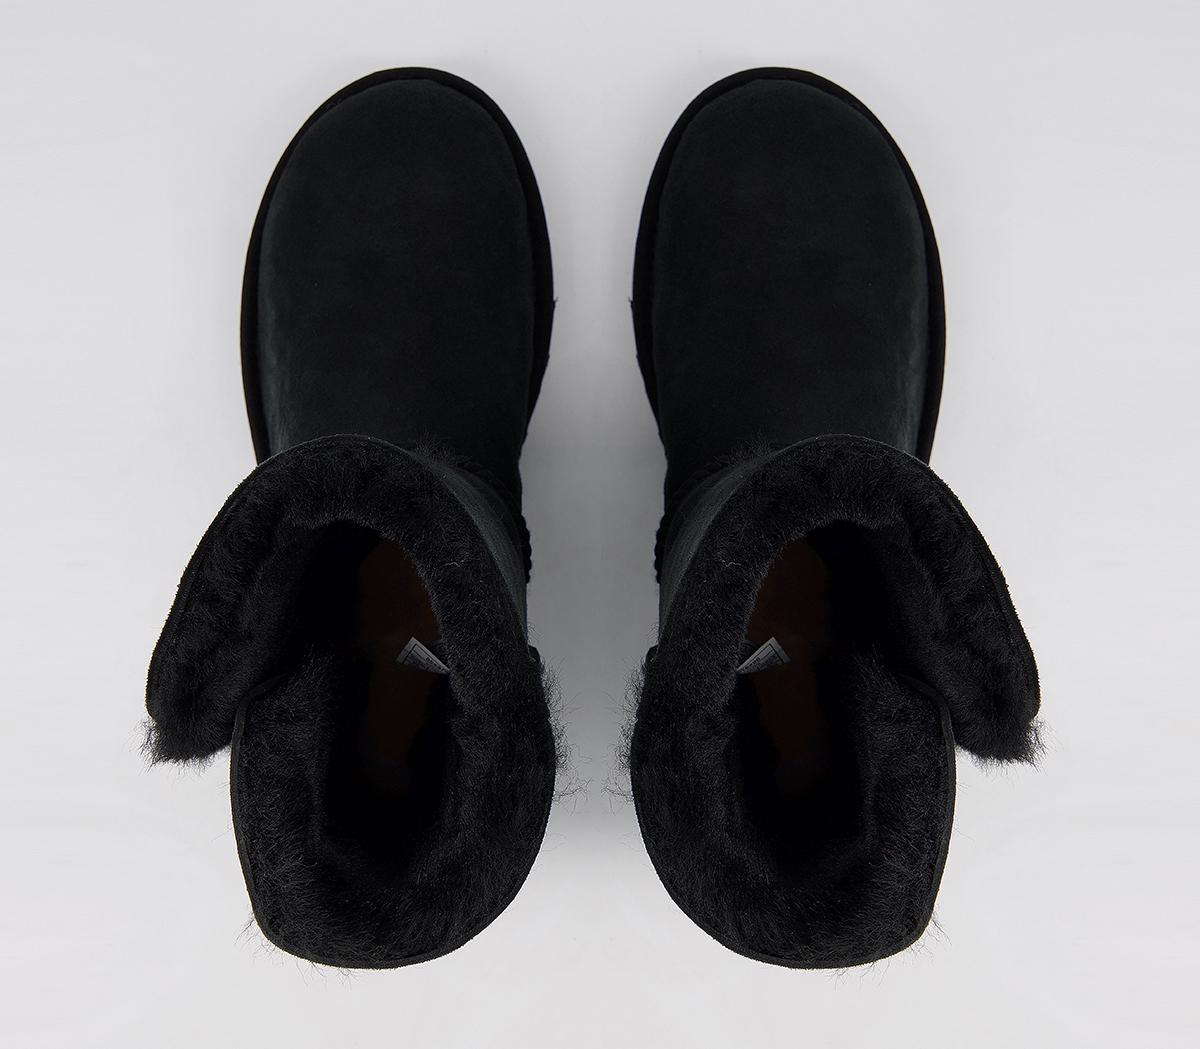 UGG Bailey Button II Boots Black Suede - Ankle Boots